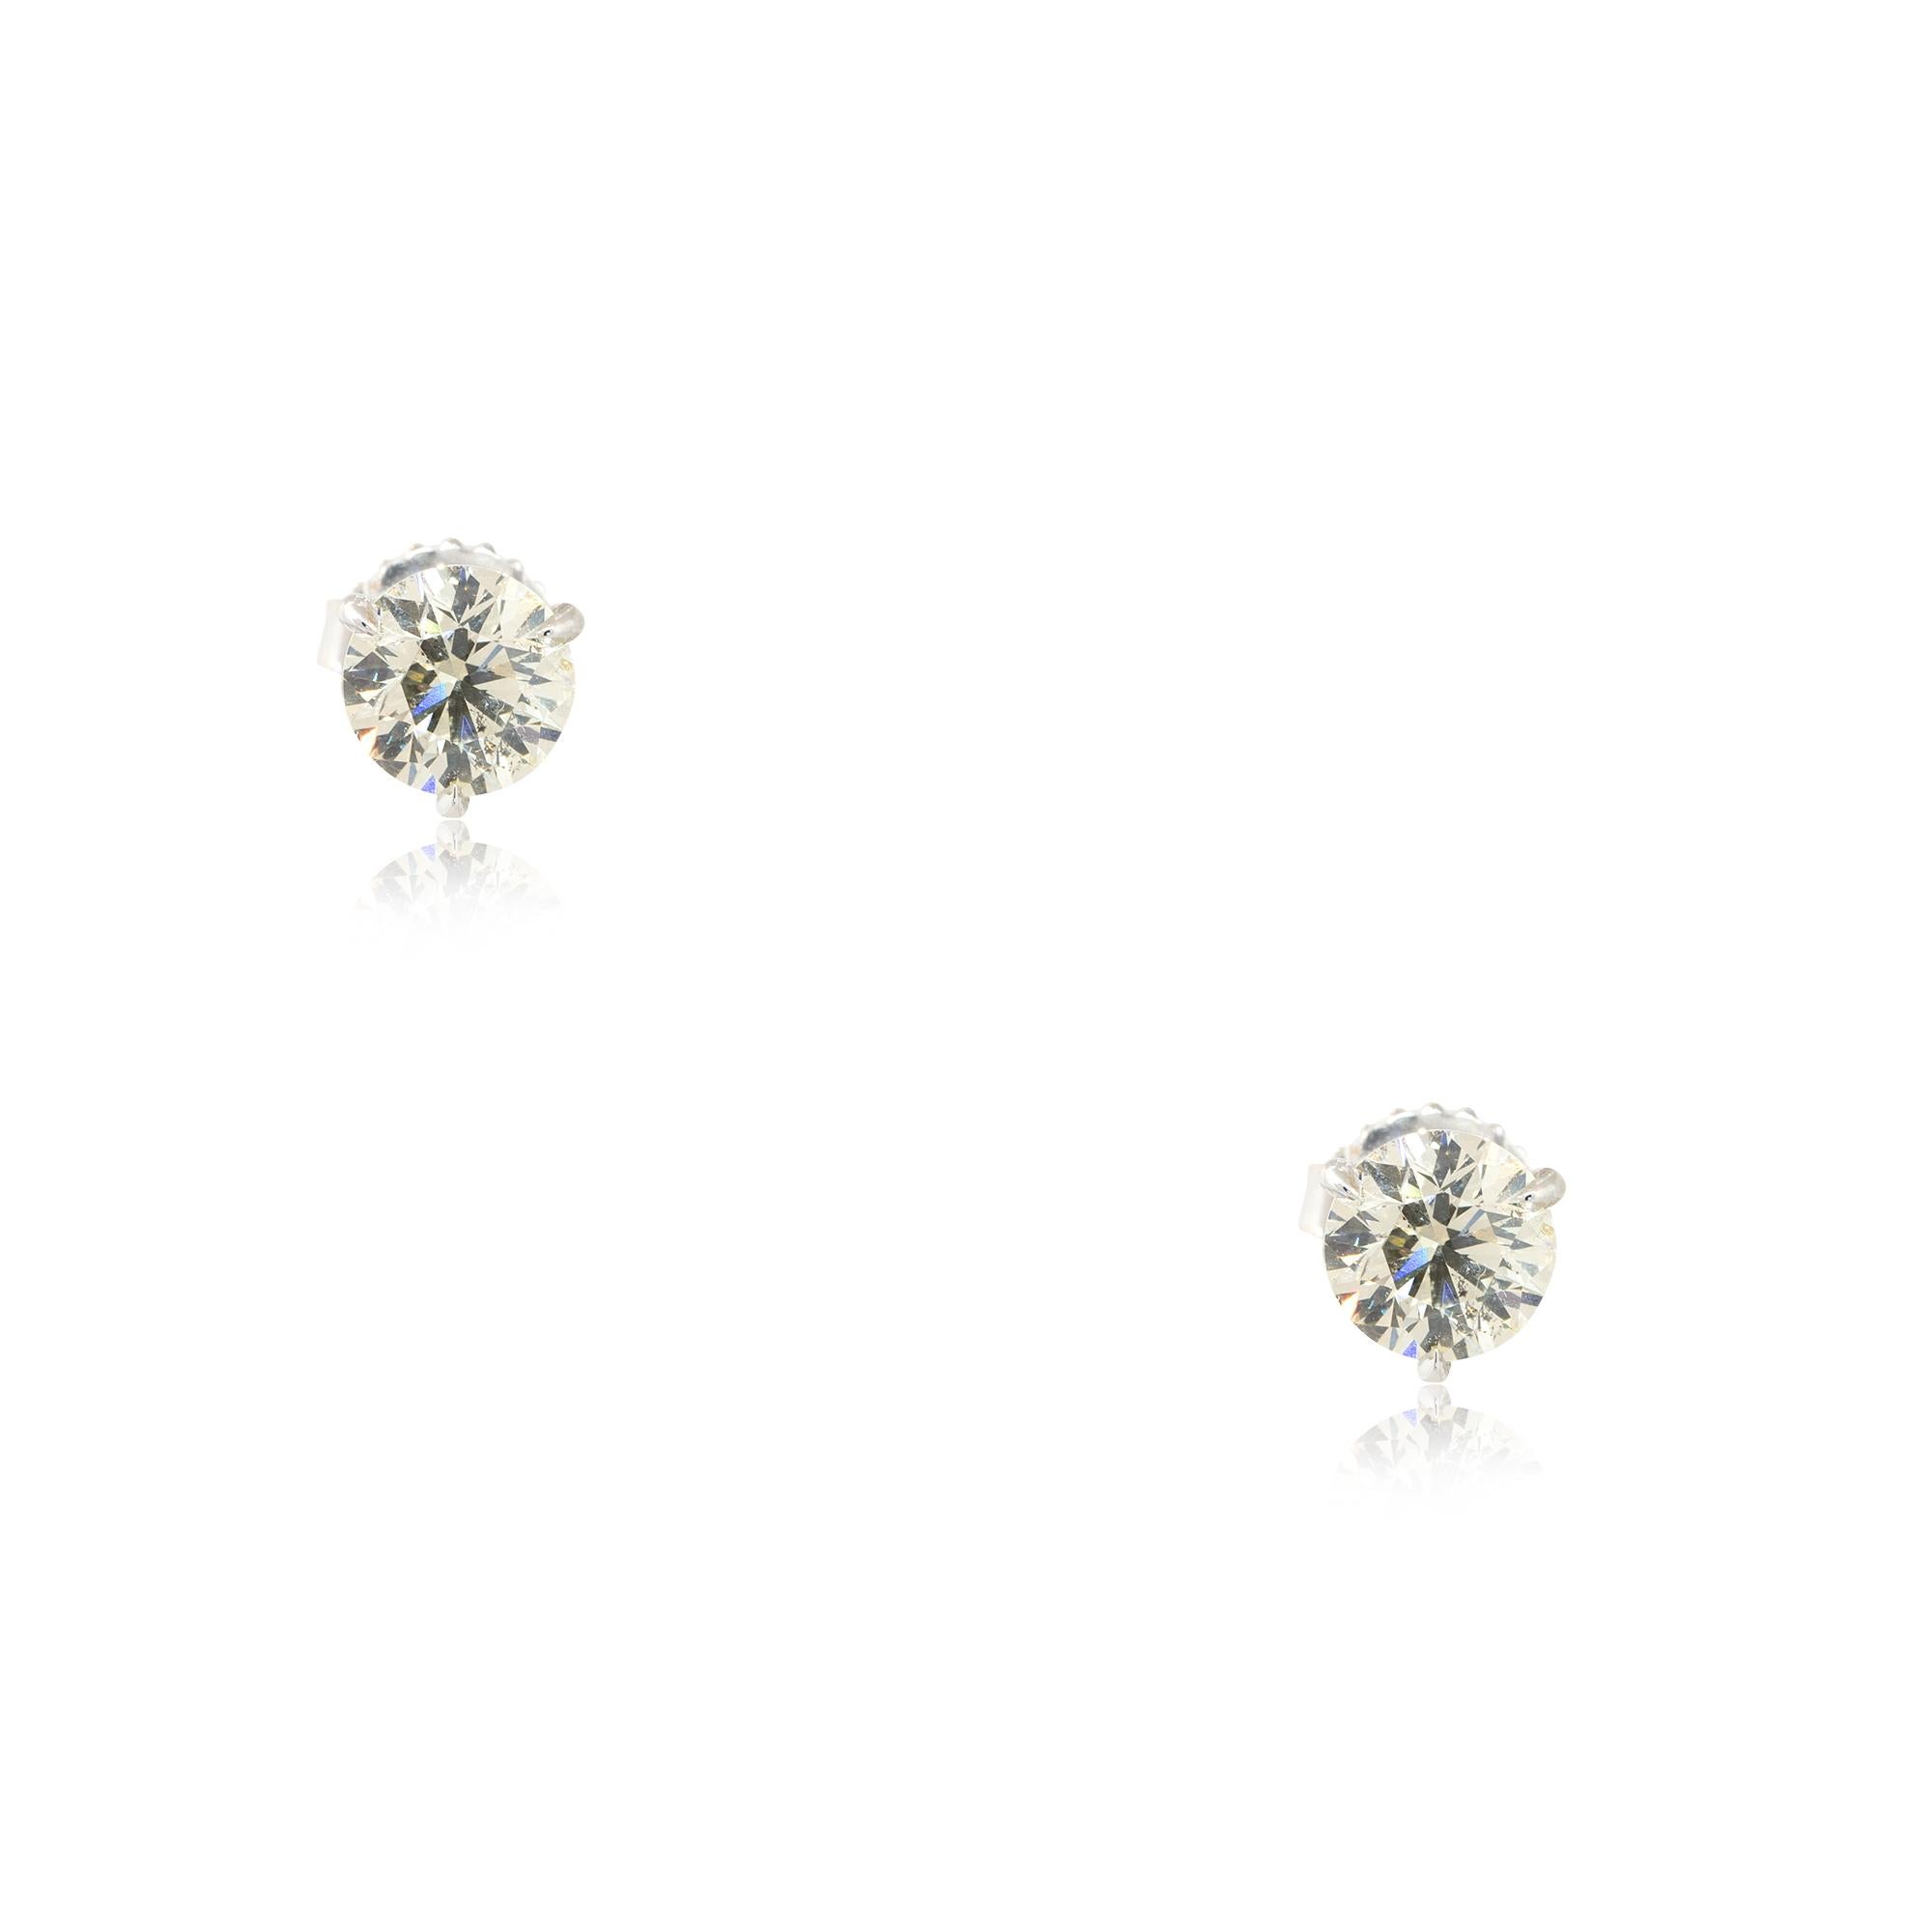 Material: 14k White Gold
Diamond Details: Approx. 2.30ctw of round cut Diamonds. Diamonds are J/K in color and SI1 in clarity
Total Weight: Unknown
Earring Backs: Friction Backs
Additional Details: This item comes with a presentation box!
SKU: